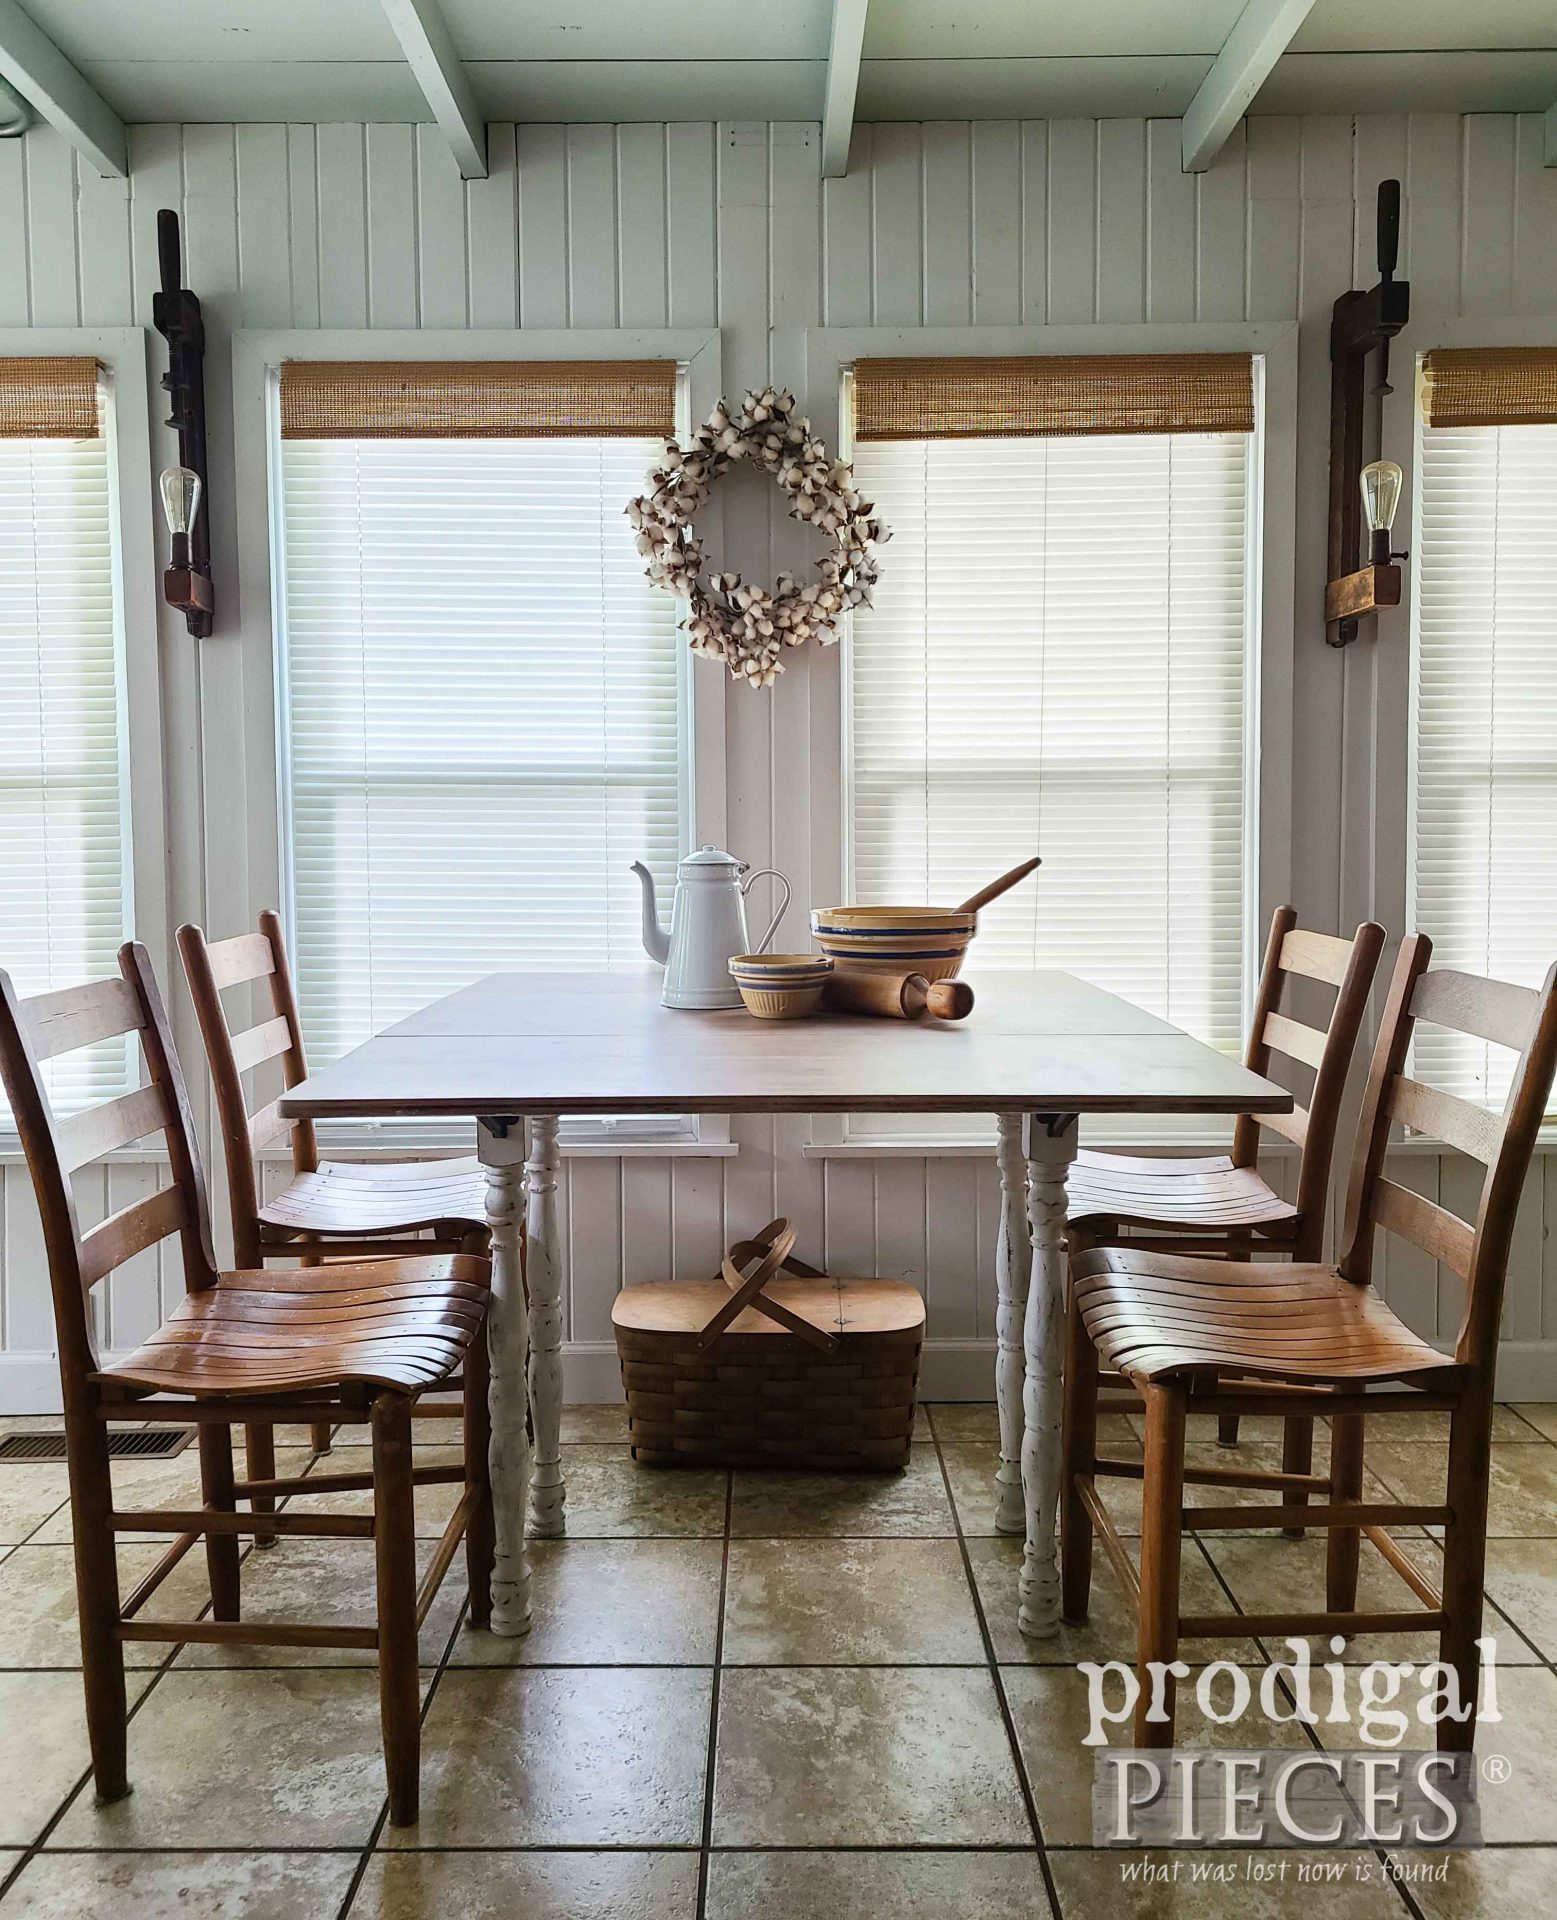 Vintage Farmhouse Drop-Leaf Dining Table & Chairs by Larissa of Prodigal Pieces | prodigalpieces.com #prodigalpieces #farmhouse #dining #diy #vintage